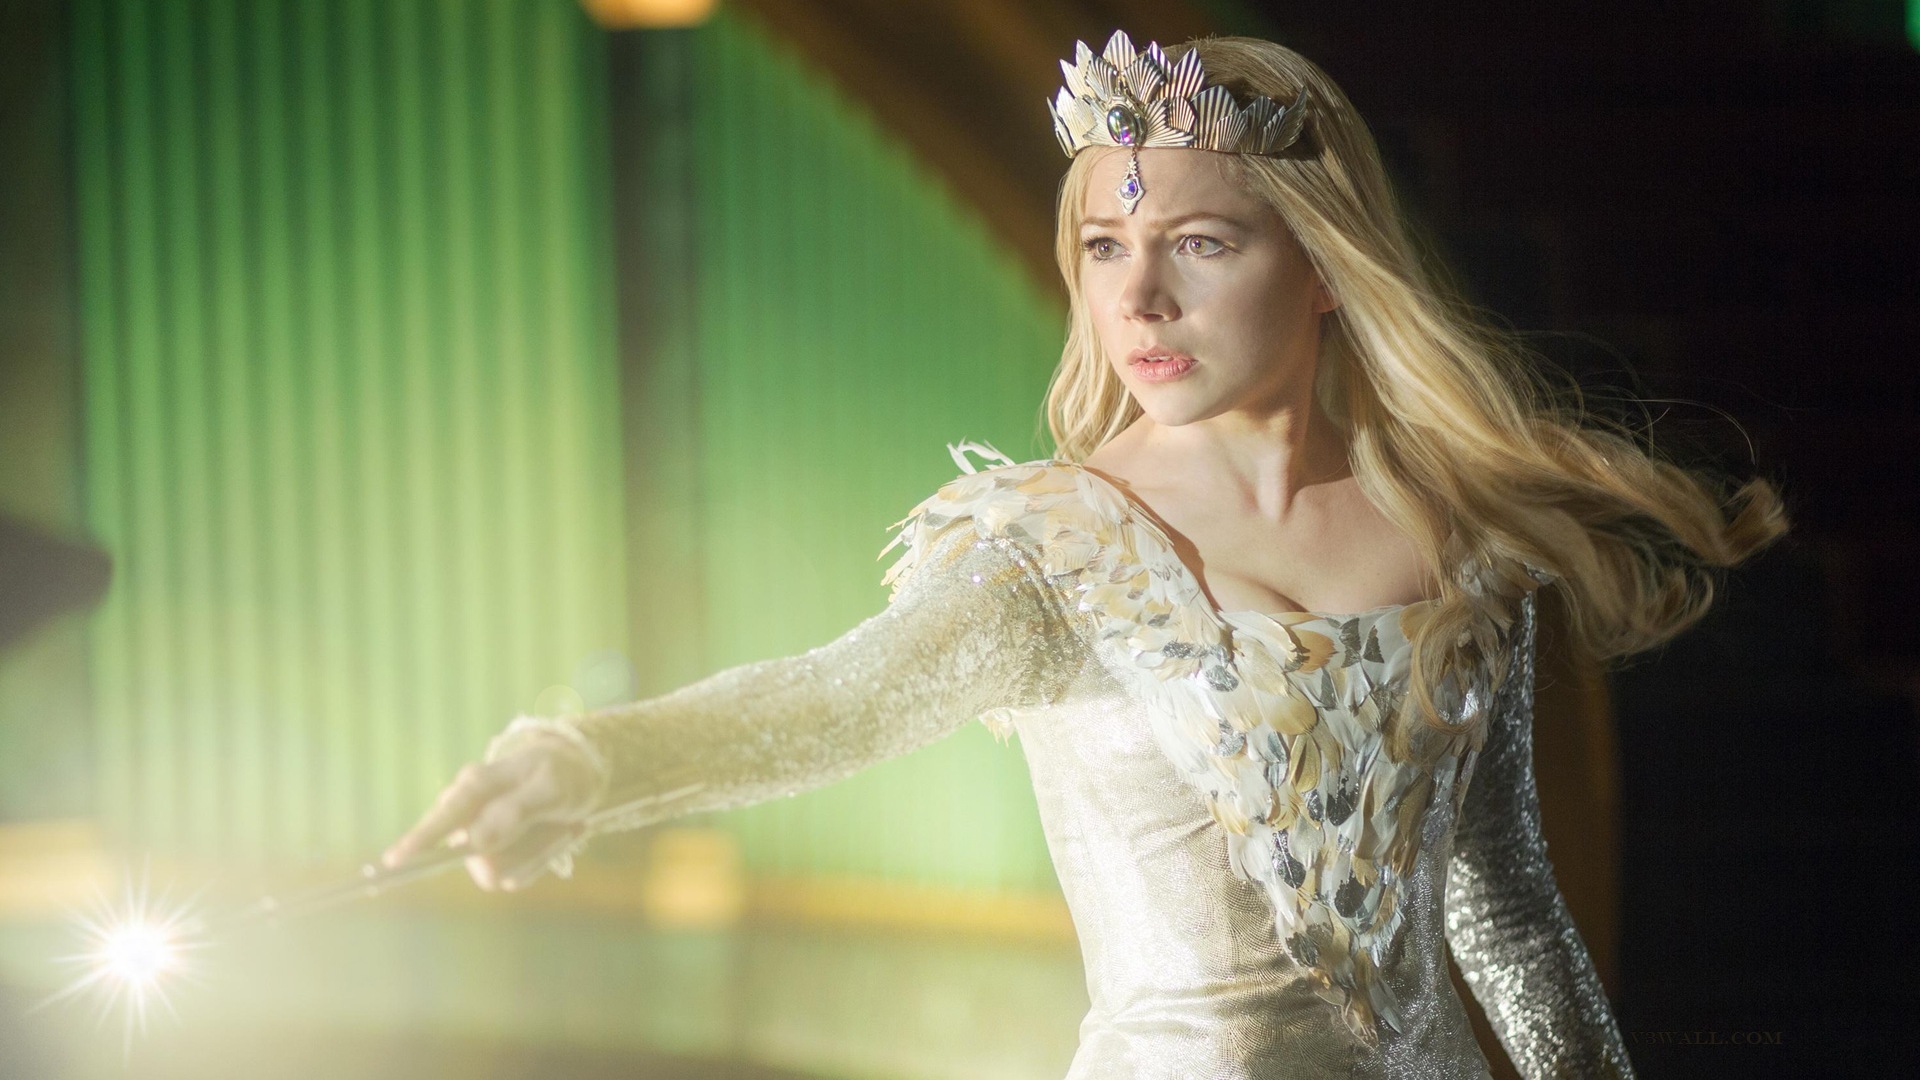 Oz The Great and Powerful 2013 HD wallpapers #5 - 1920x1080